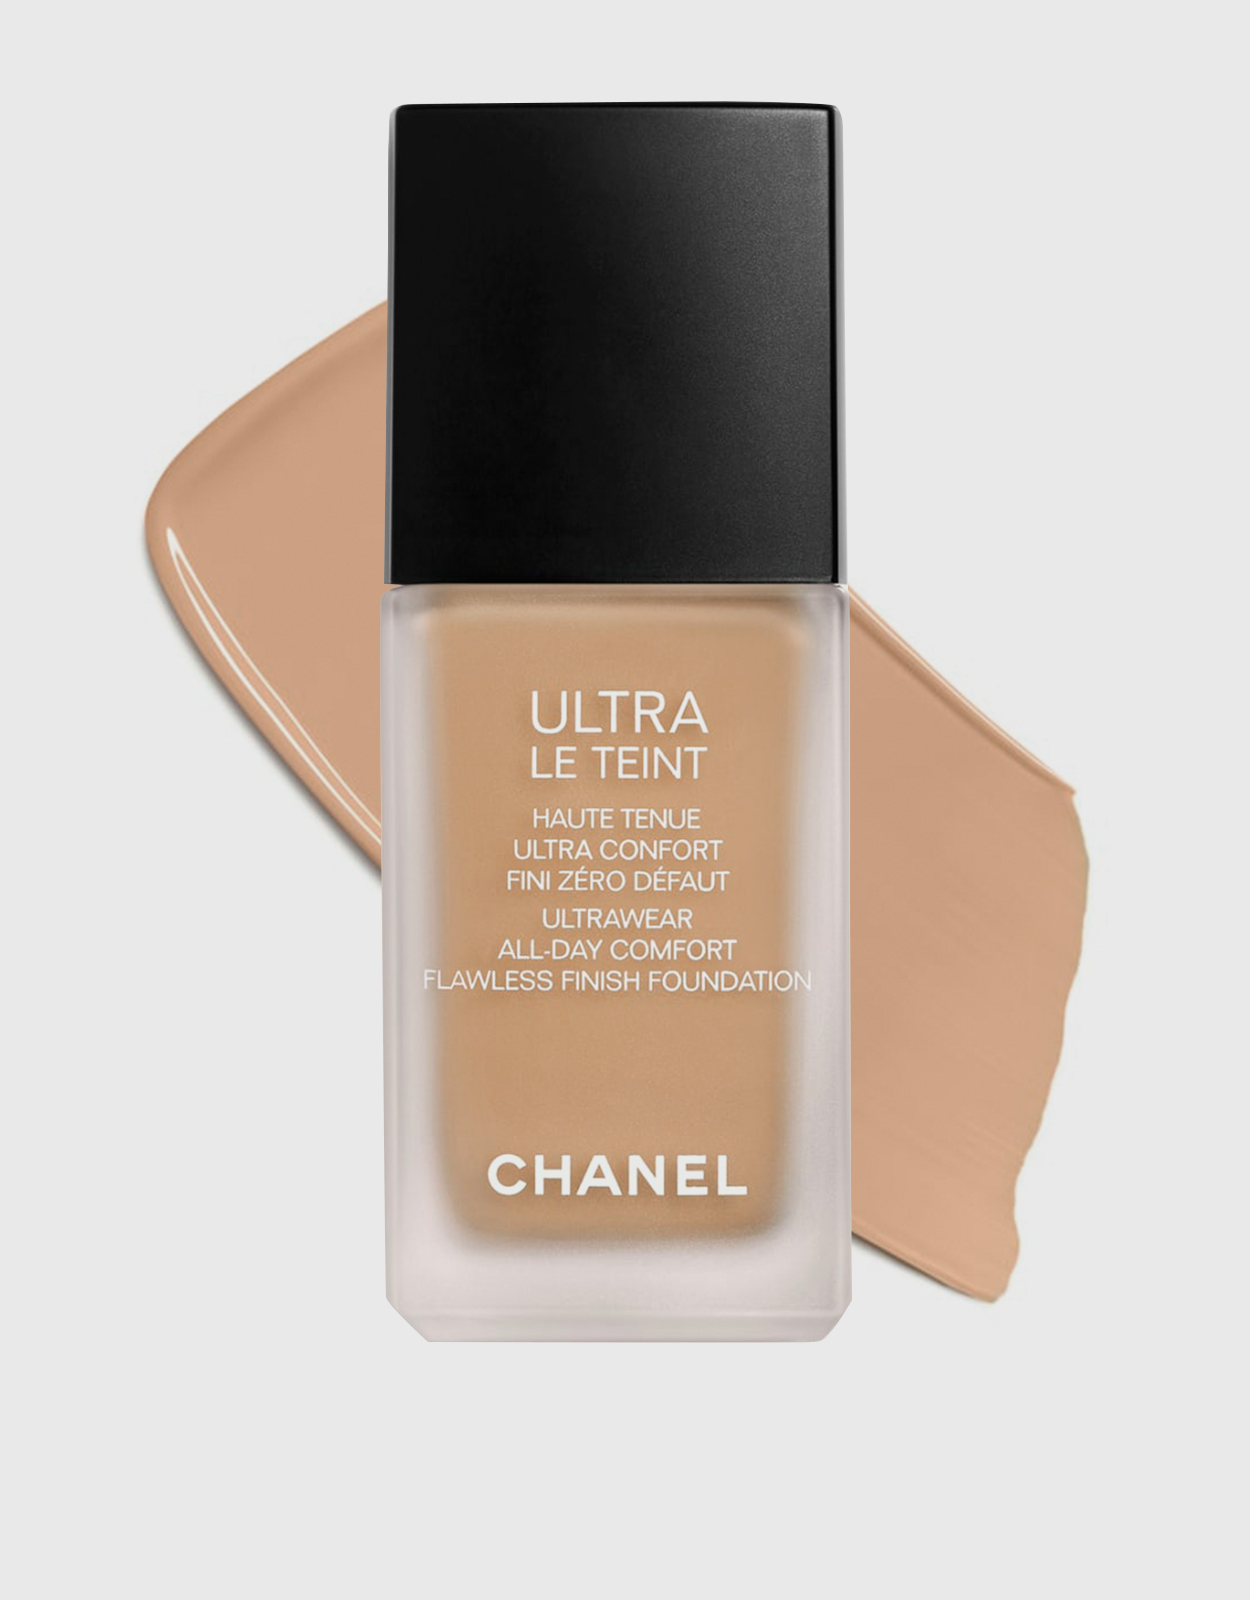 Chanel Beauty Ultra Le Teint Ultrawear All-Day Comfort Flawless Finish  Foundation-B40 (Makeup,Face,Foundation)